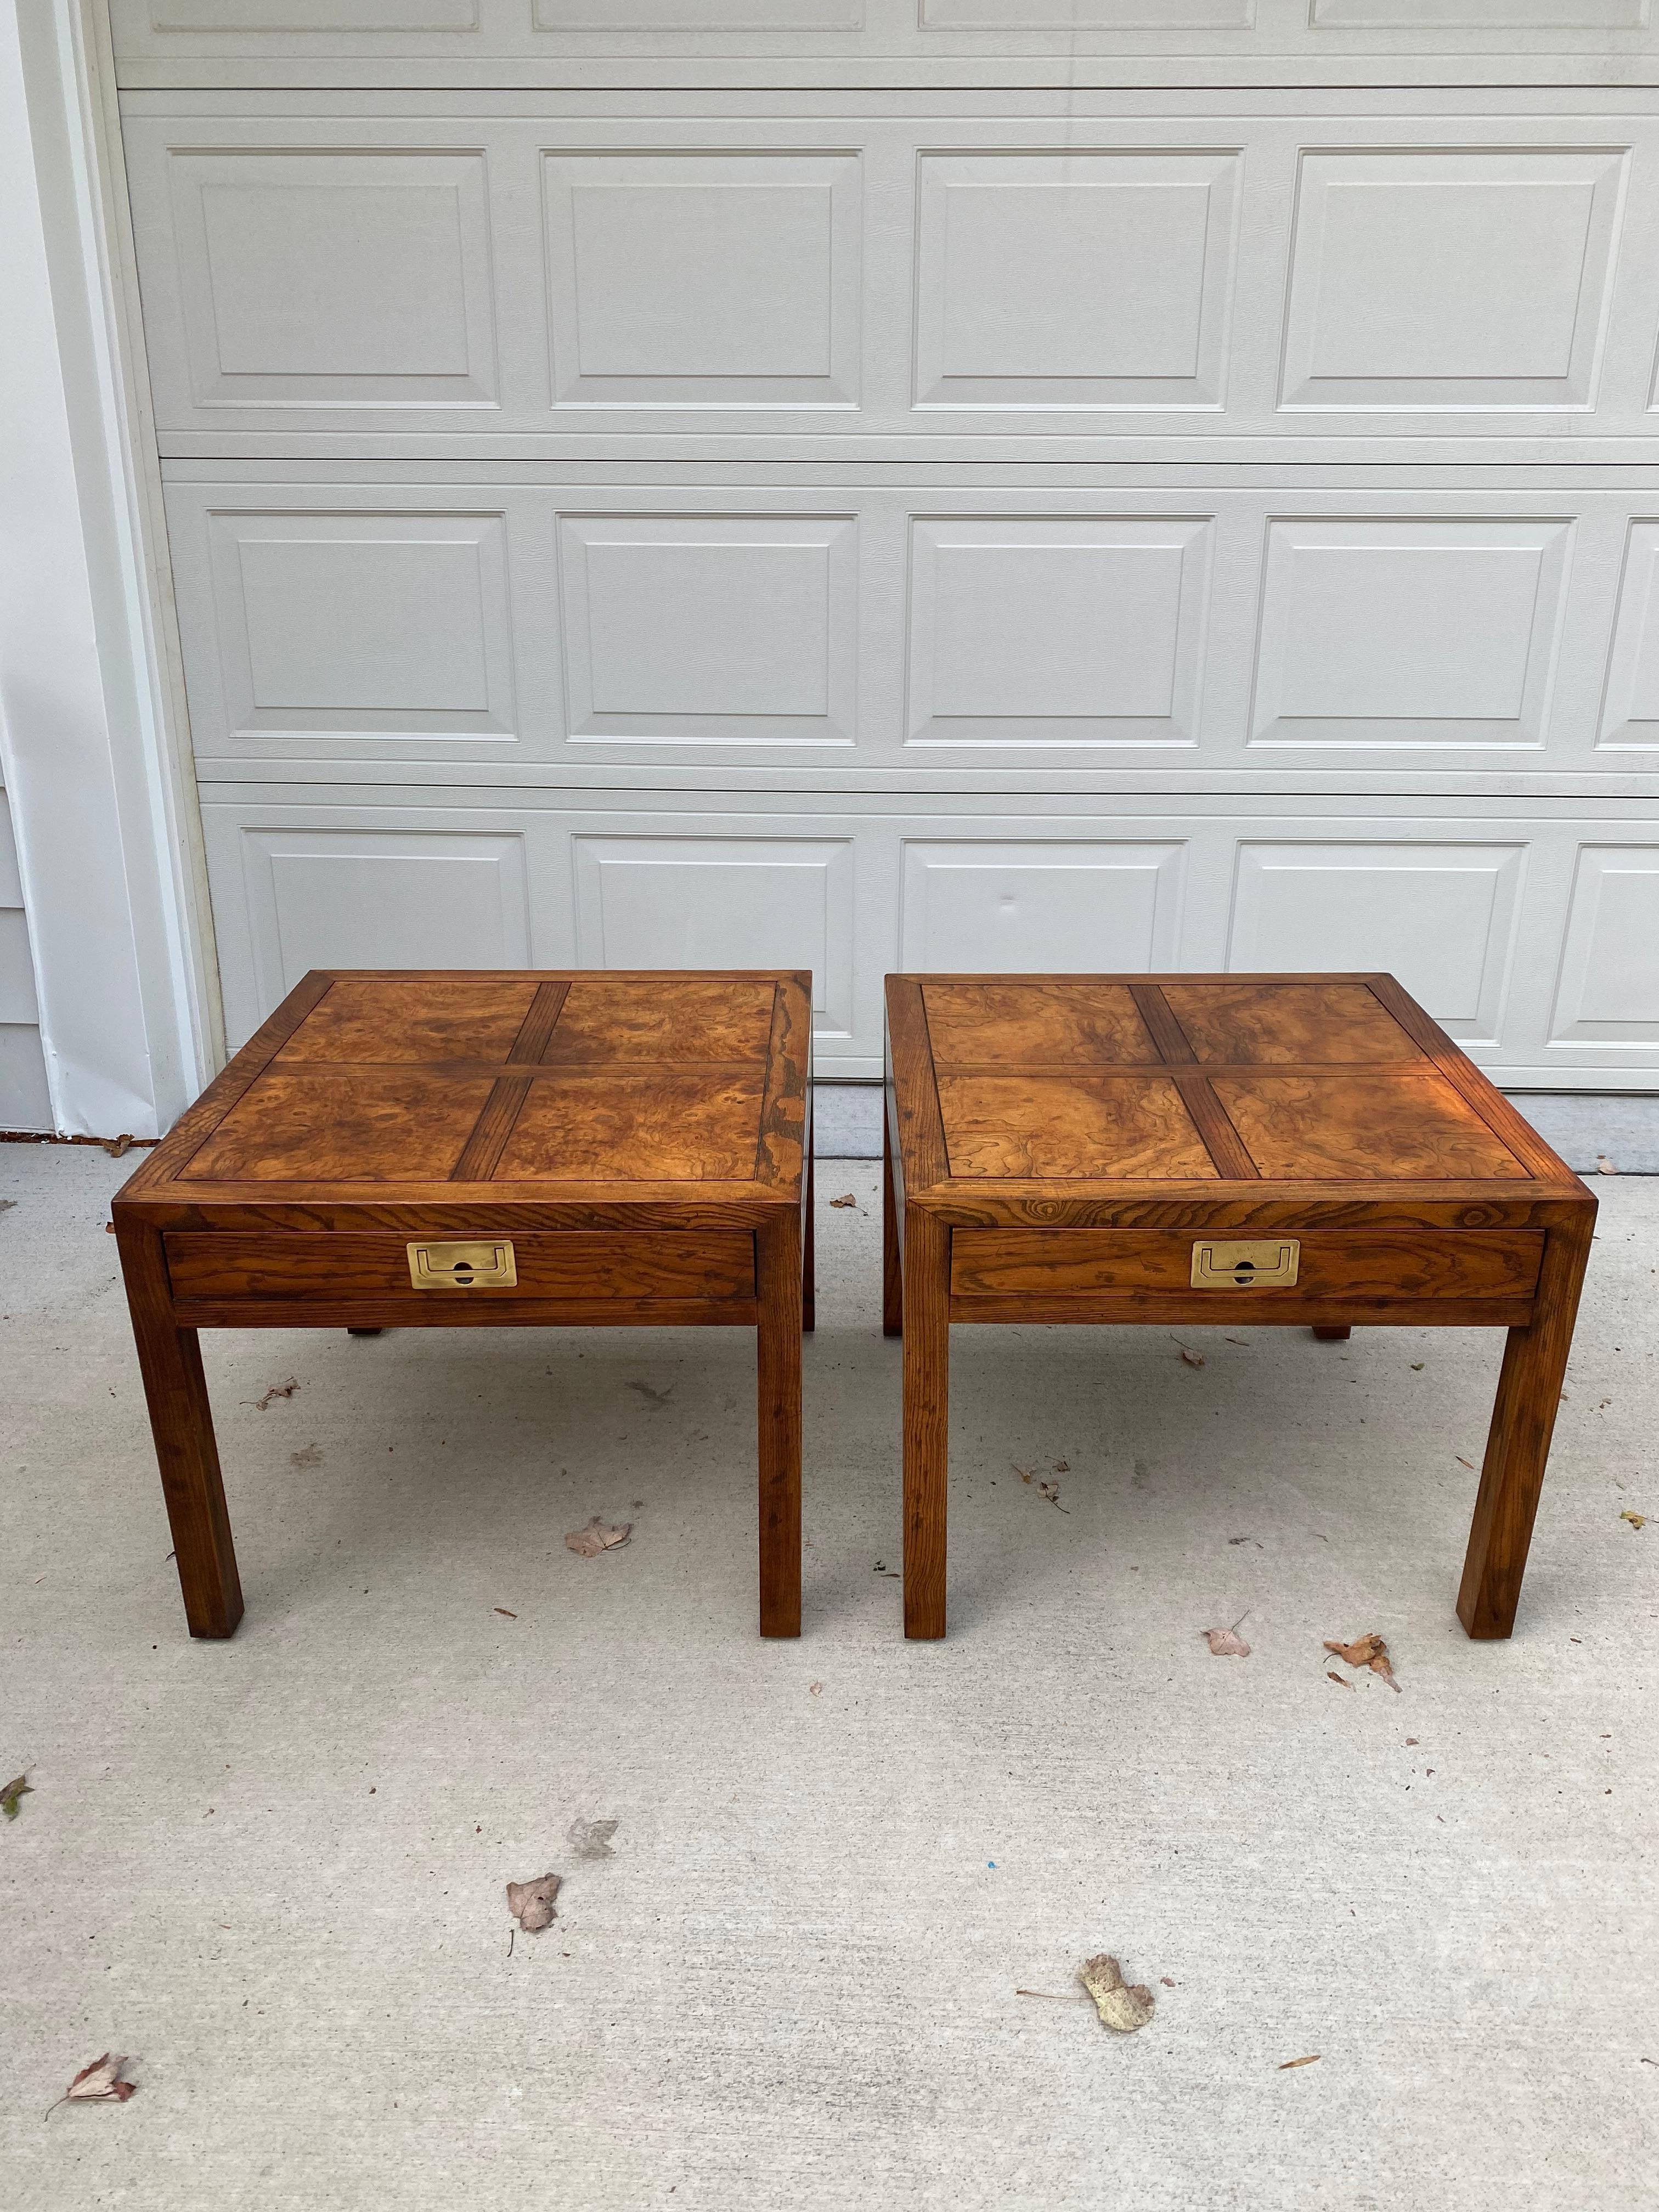 A beautiful pair of Henredon Parquetry top burl wood walnut end tables! In an amazing condition, drawers pull in and out correctly and only a few nicks on the legs (see pictures). These end tables are so unique with their burl wood top features.